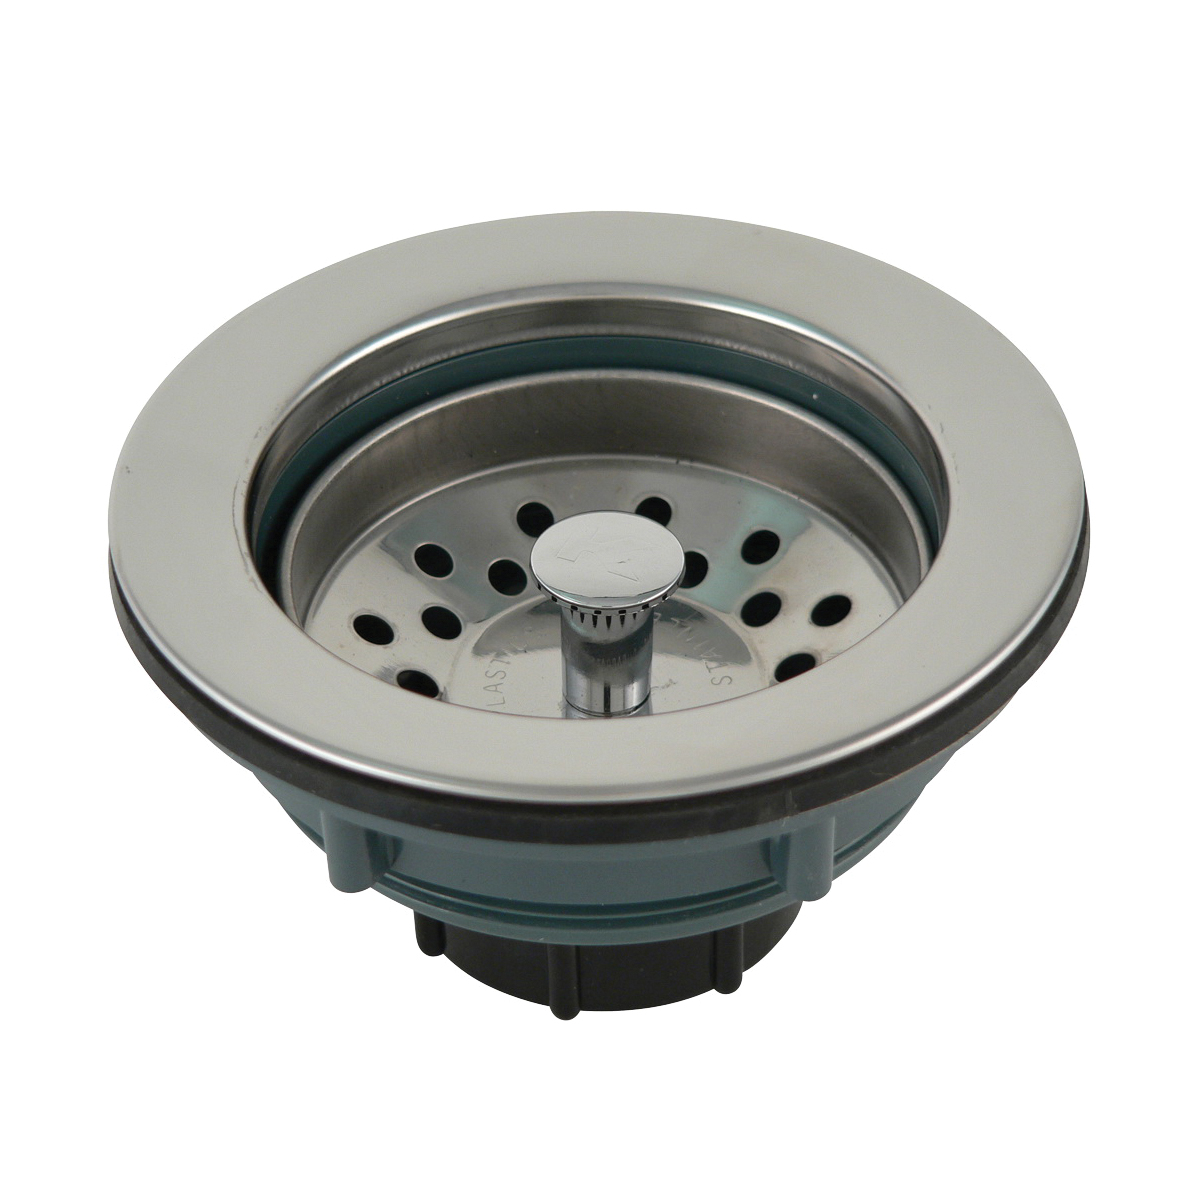 PP20665 Basket Strainer, Plastic, For: 3-1/2 in Dia Opening Kitchen Sink